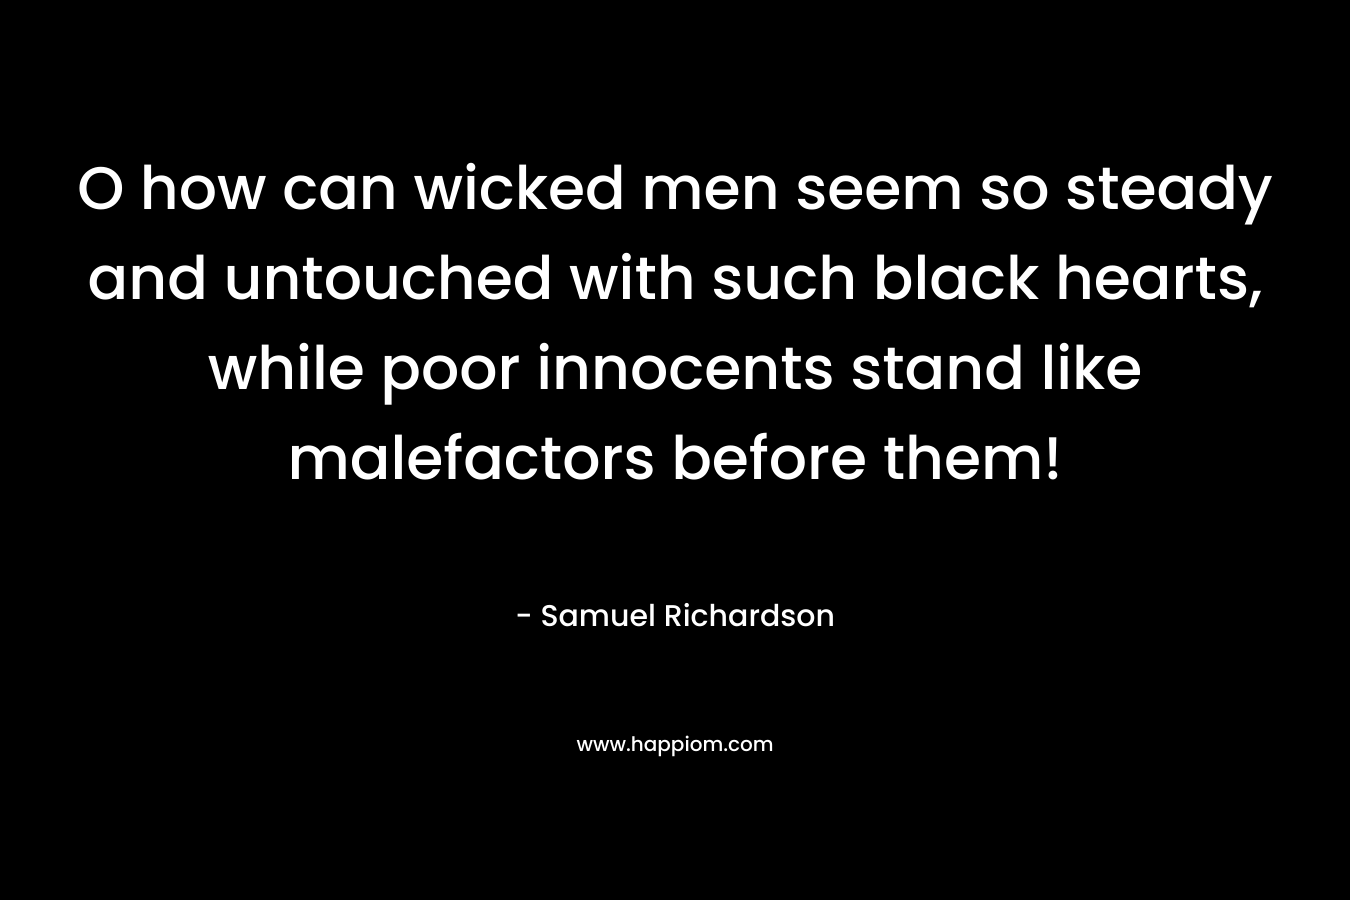 O how can wicked men seem so steady and untouched with such black hearts, while poor innocents stand like malefactors before them! – Samuel Richardson